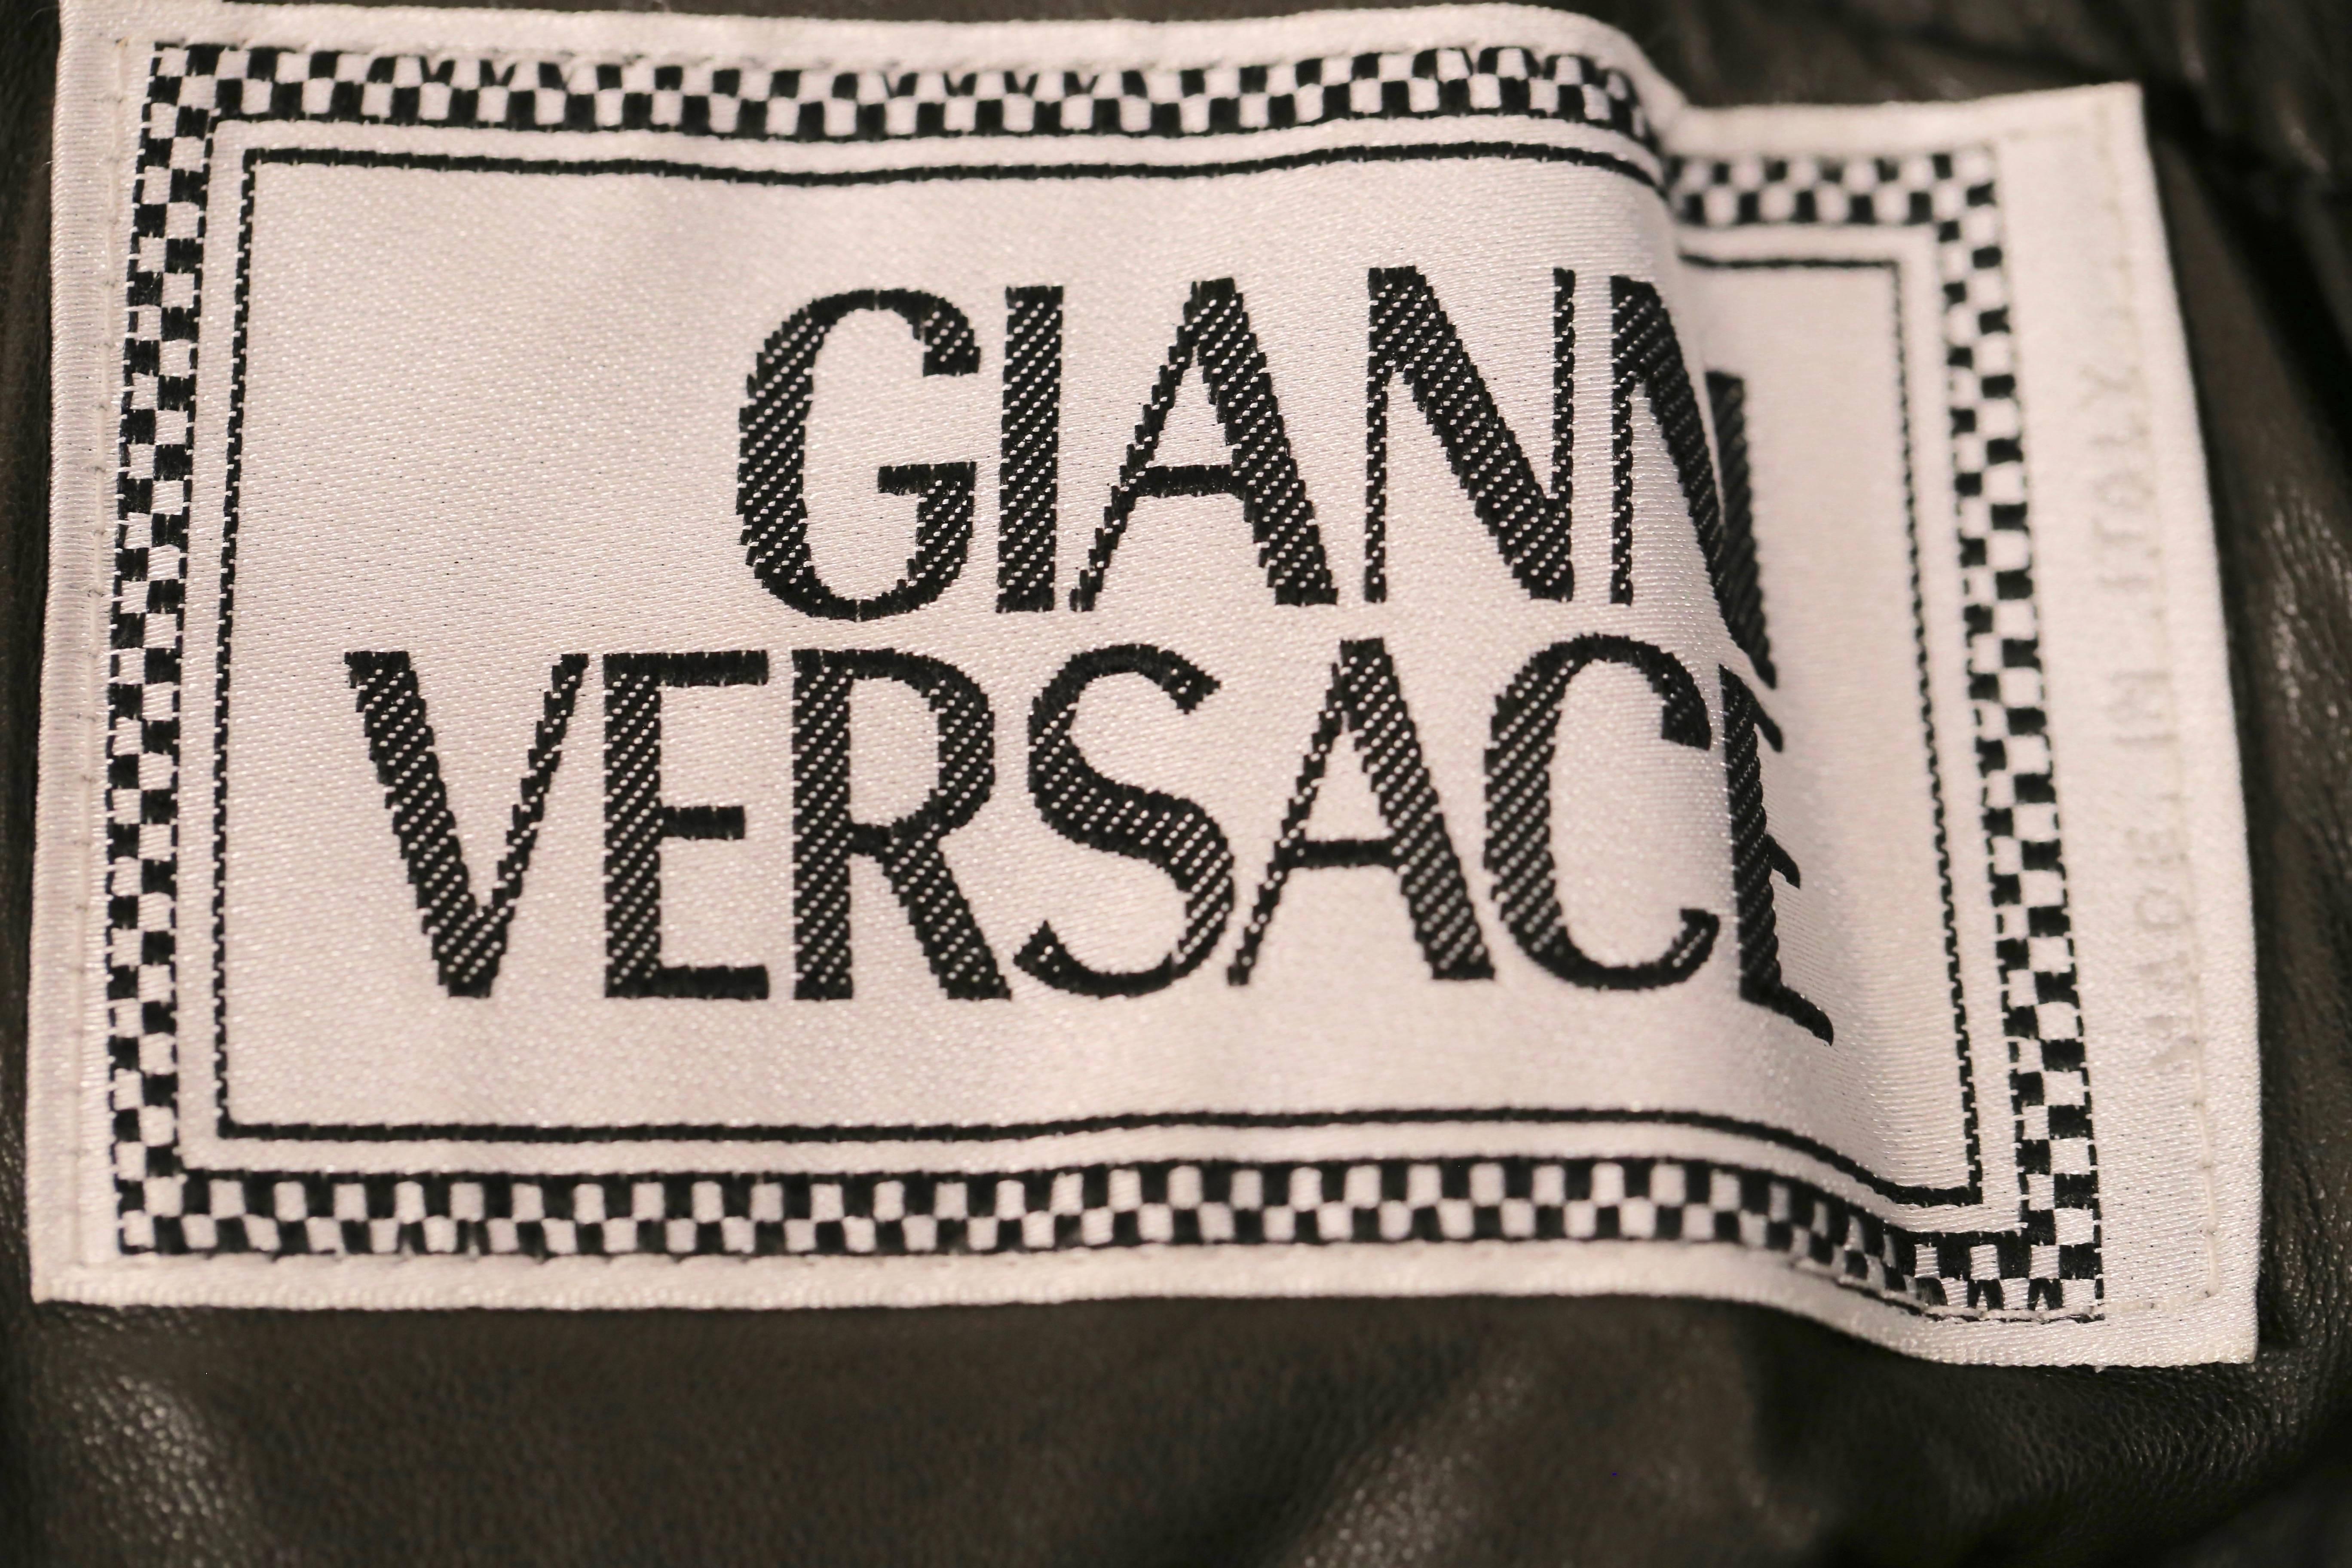 1993 GIANNI VERSACE olive shearling runwy coat with Astrakhan trim 1